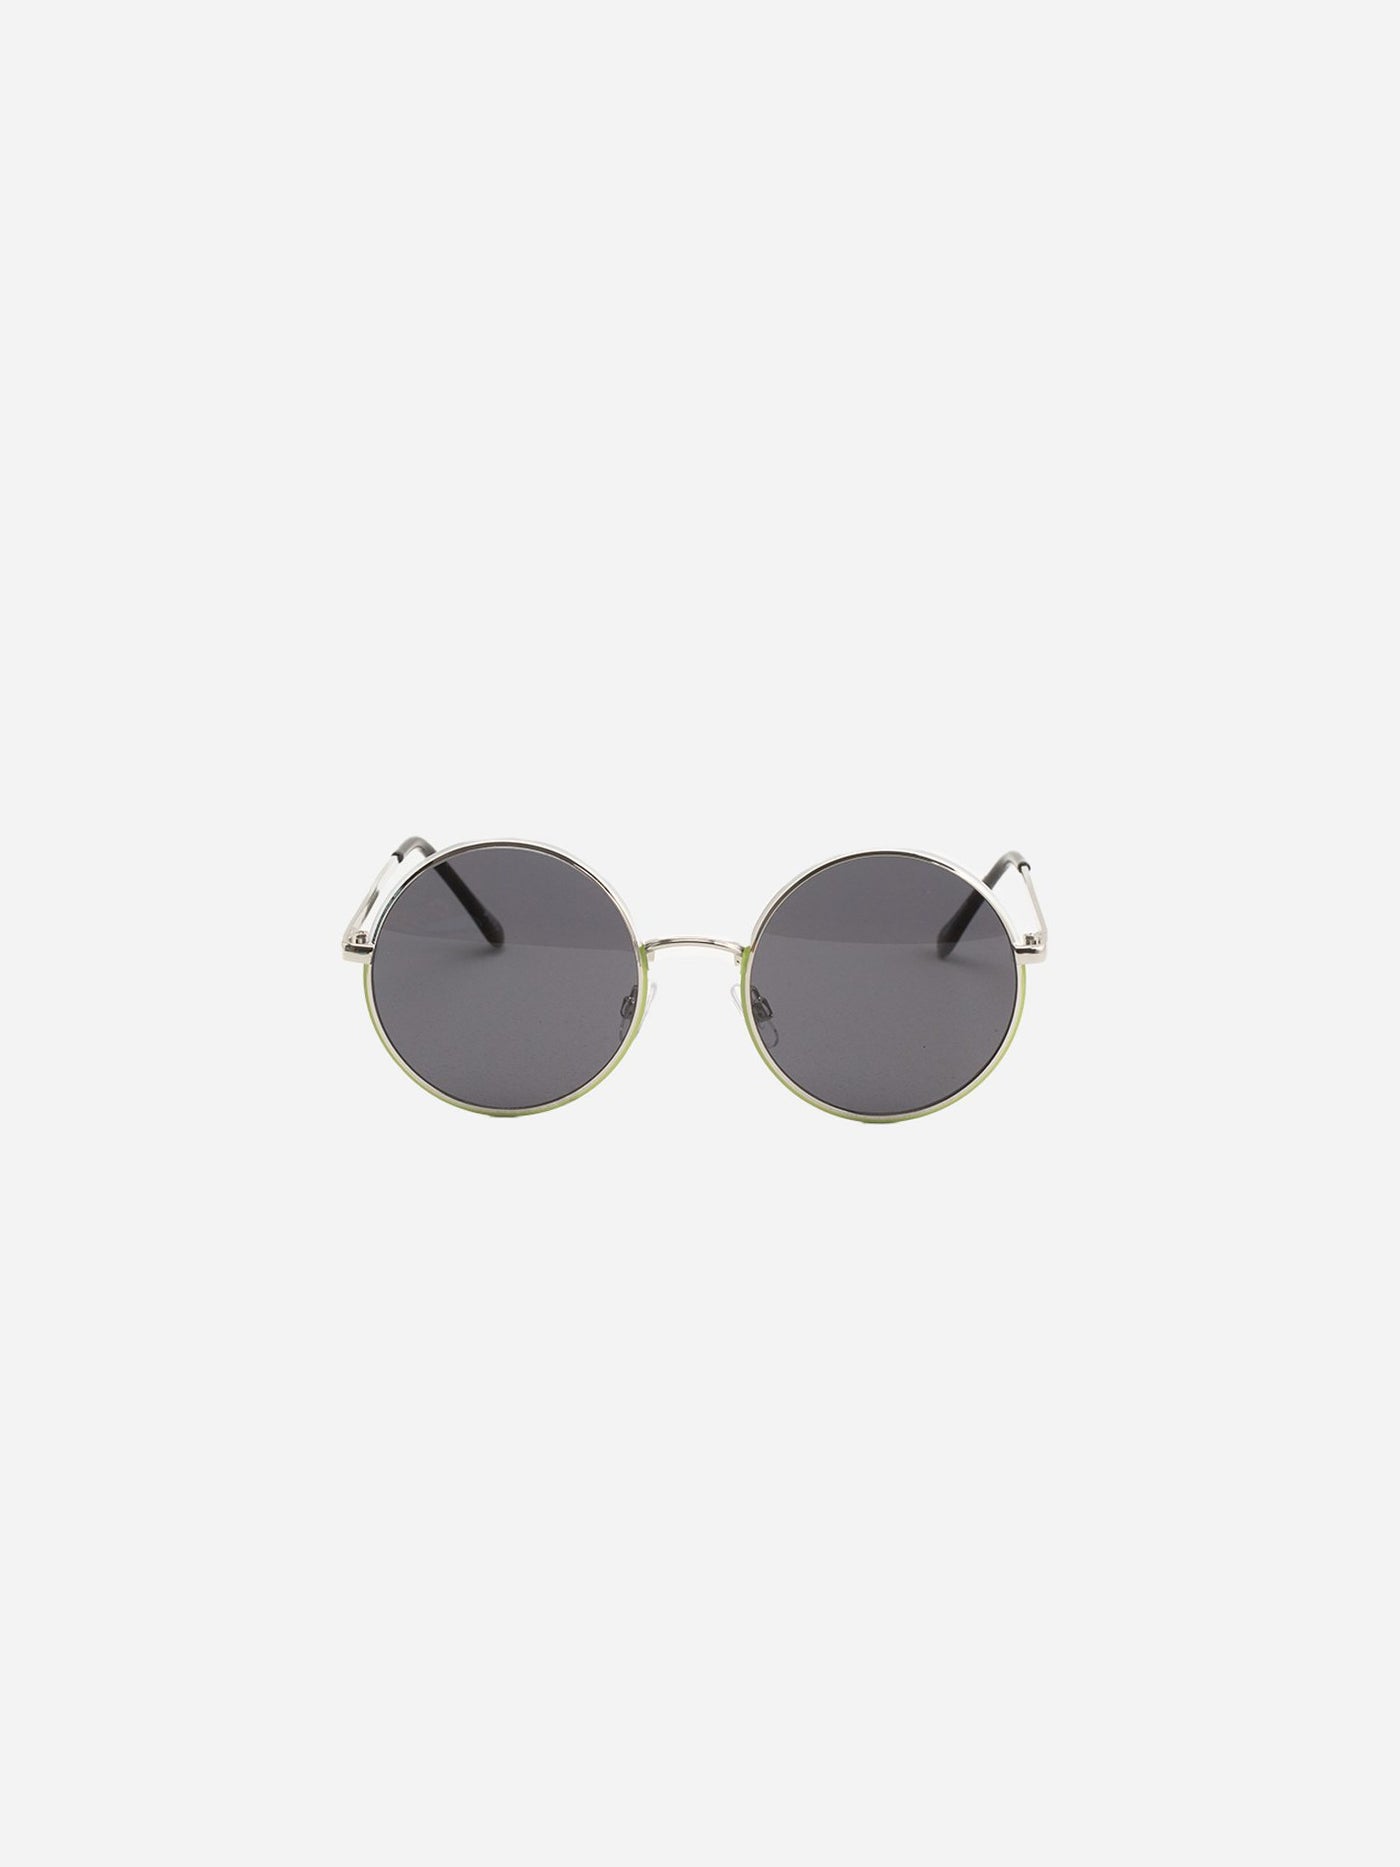 Designer Punk Style Round Small Round Sunglasses For Men And Women  Windproof Resin Frame With Vintage Style Oculos De Sol From Vivian5168,  $4.34 | DHgate.Com